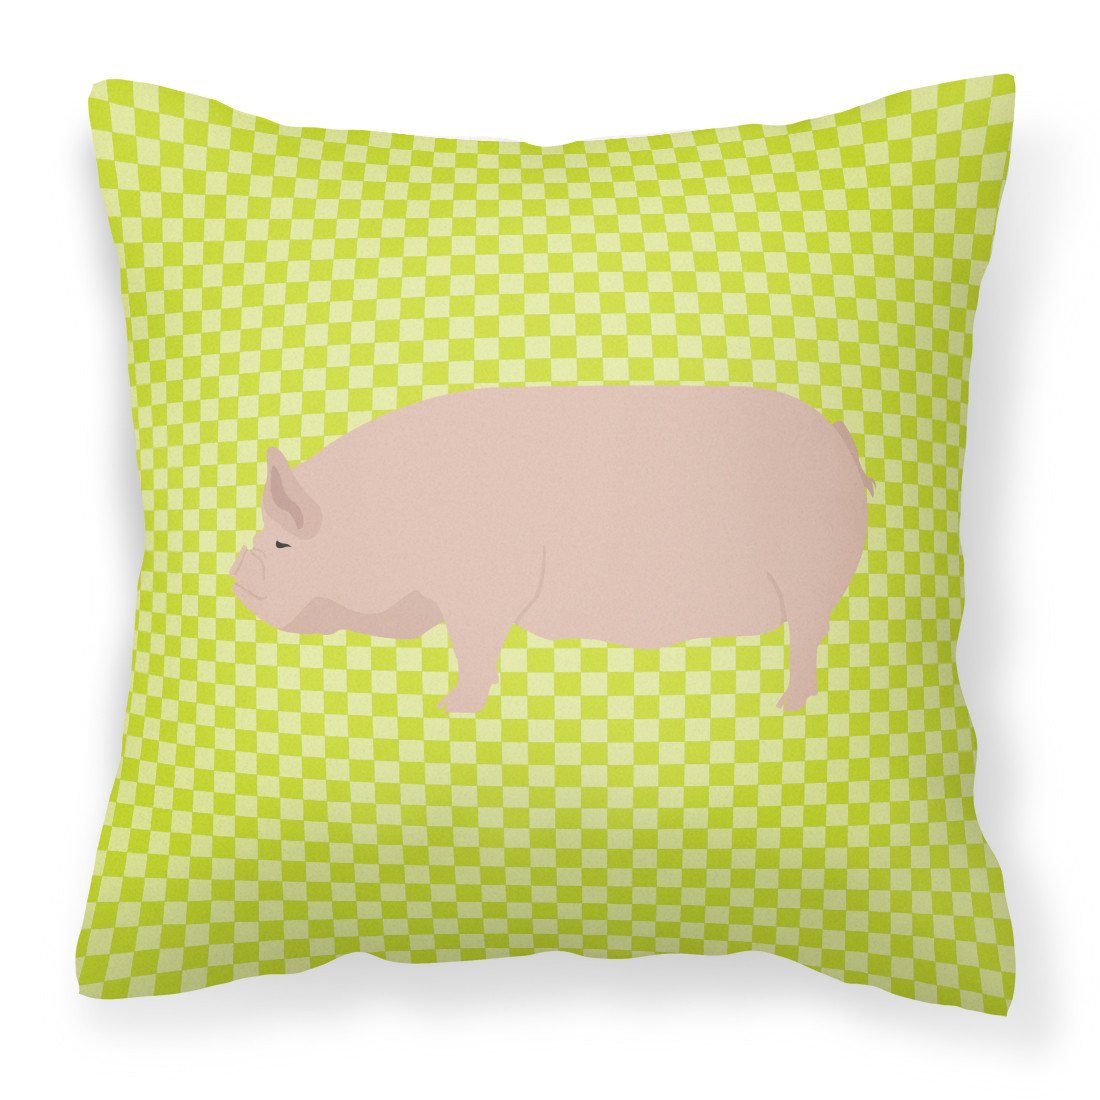 Welsh Pig Green Fabric Decorative Pillow BB7763PW1818 by Caroline's Treasures